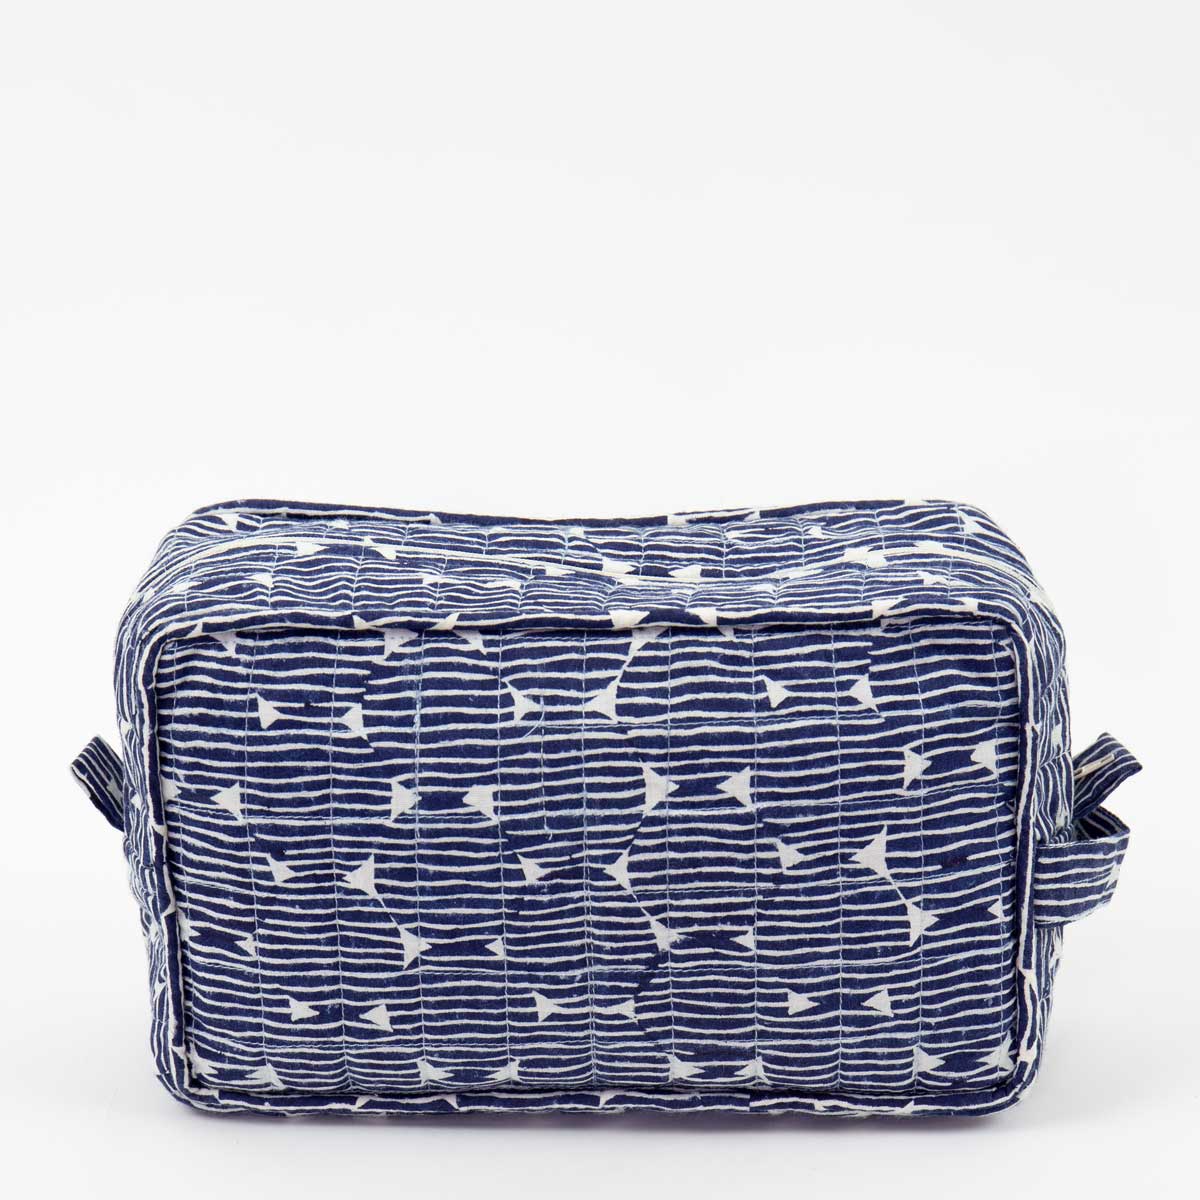 ROUNDS Toiletry bag M, blue